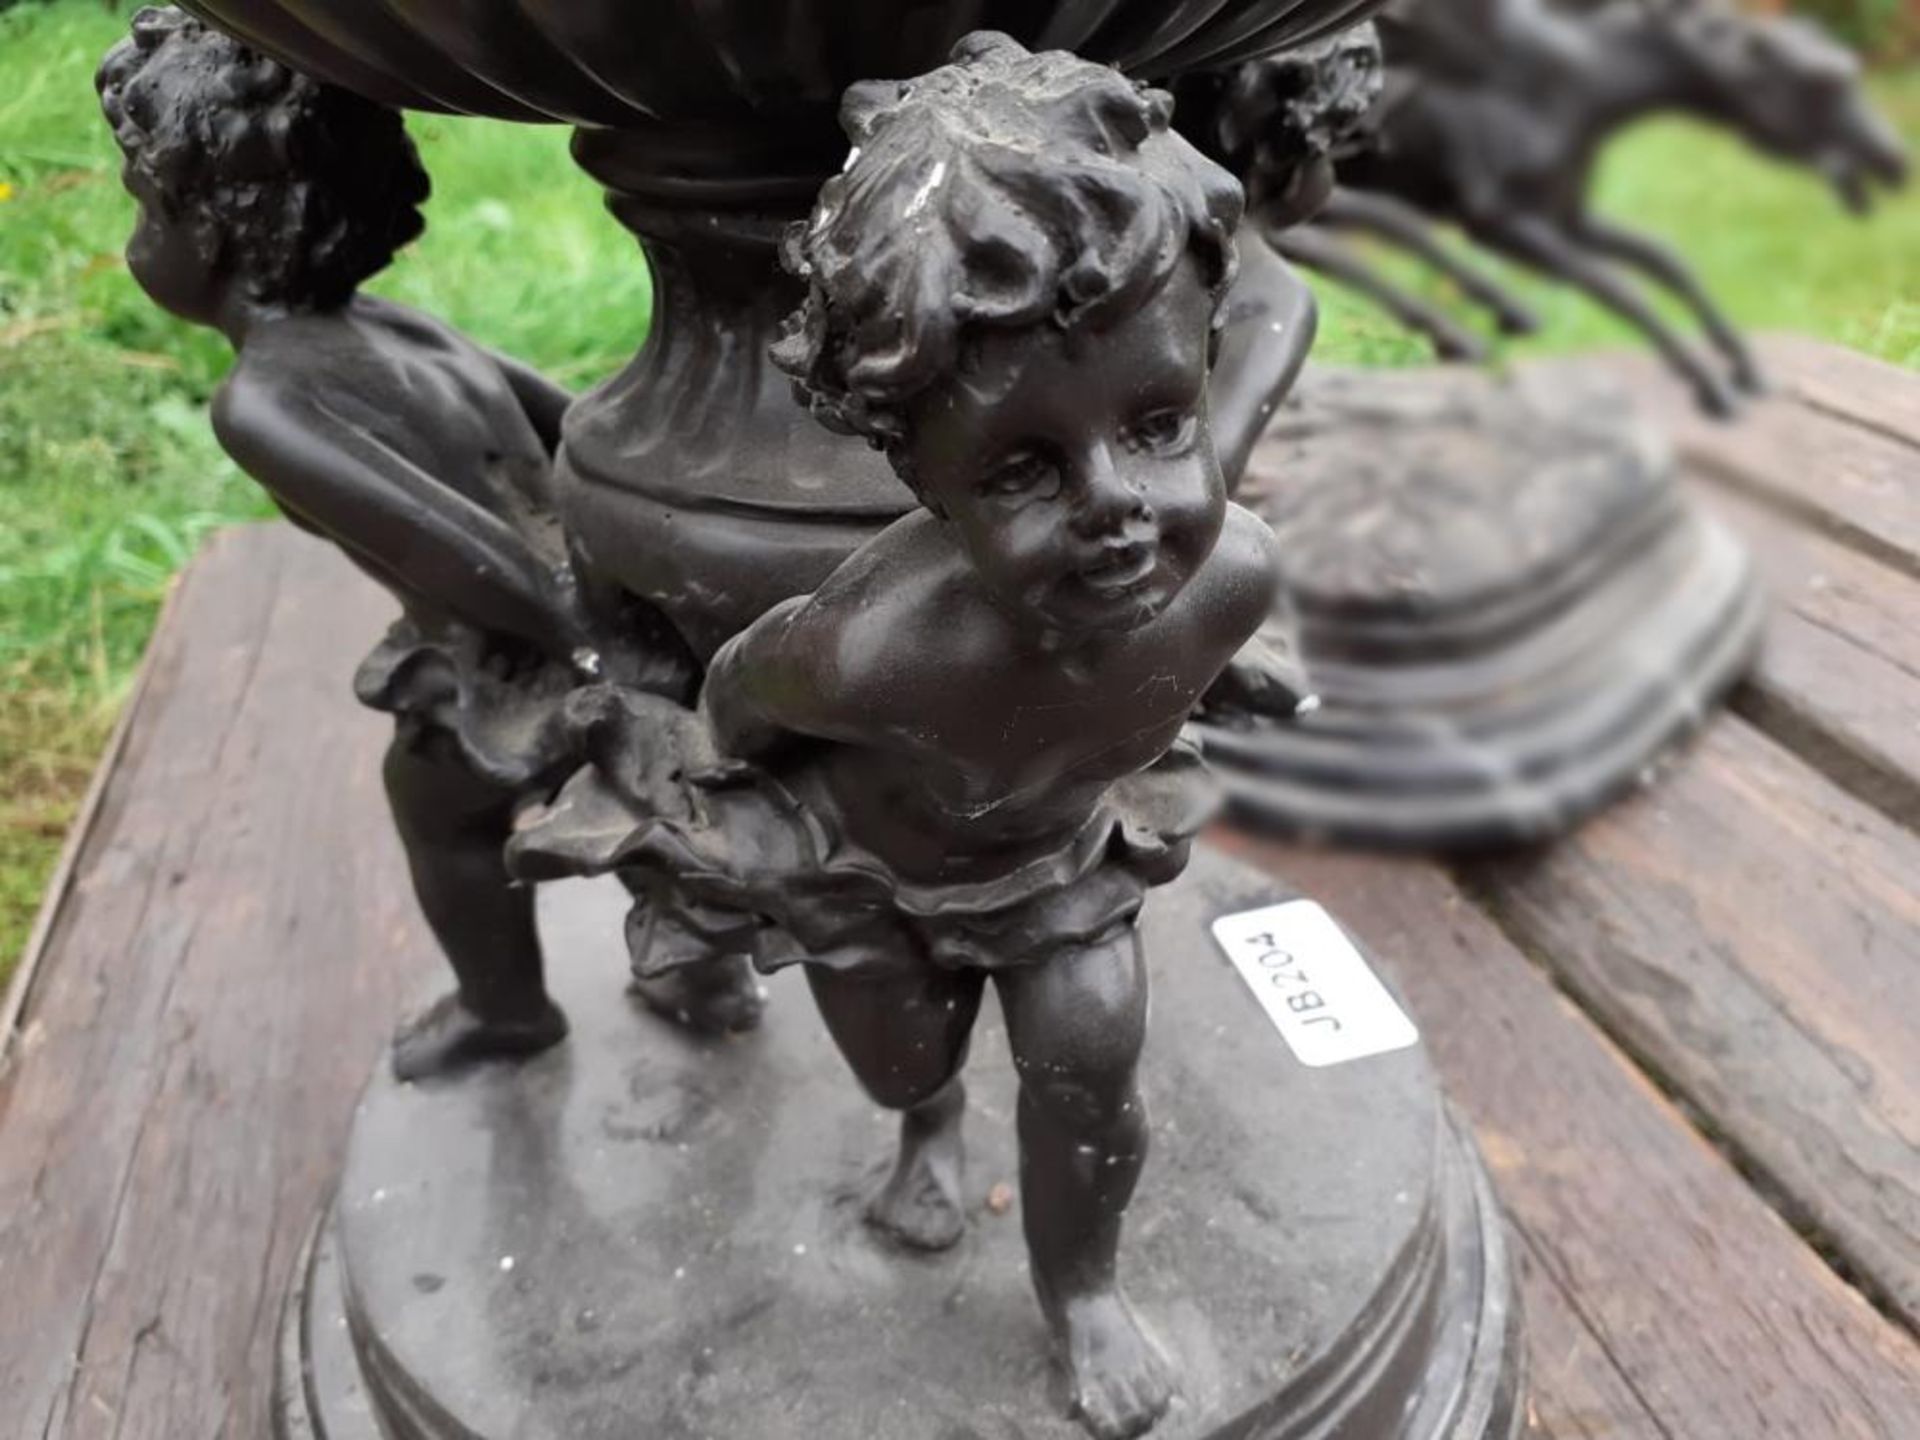 1 x Large Table Statue / Sculpture Of 3 Cherubs Carrying A Planter In Black Metal With Marble / Gran - Image 8 of 10